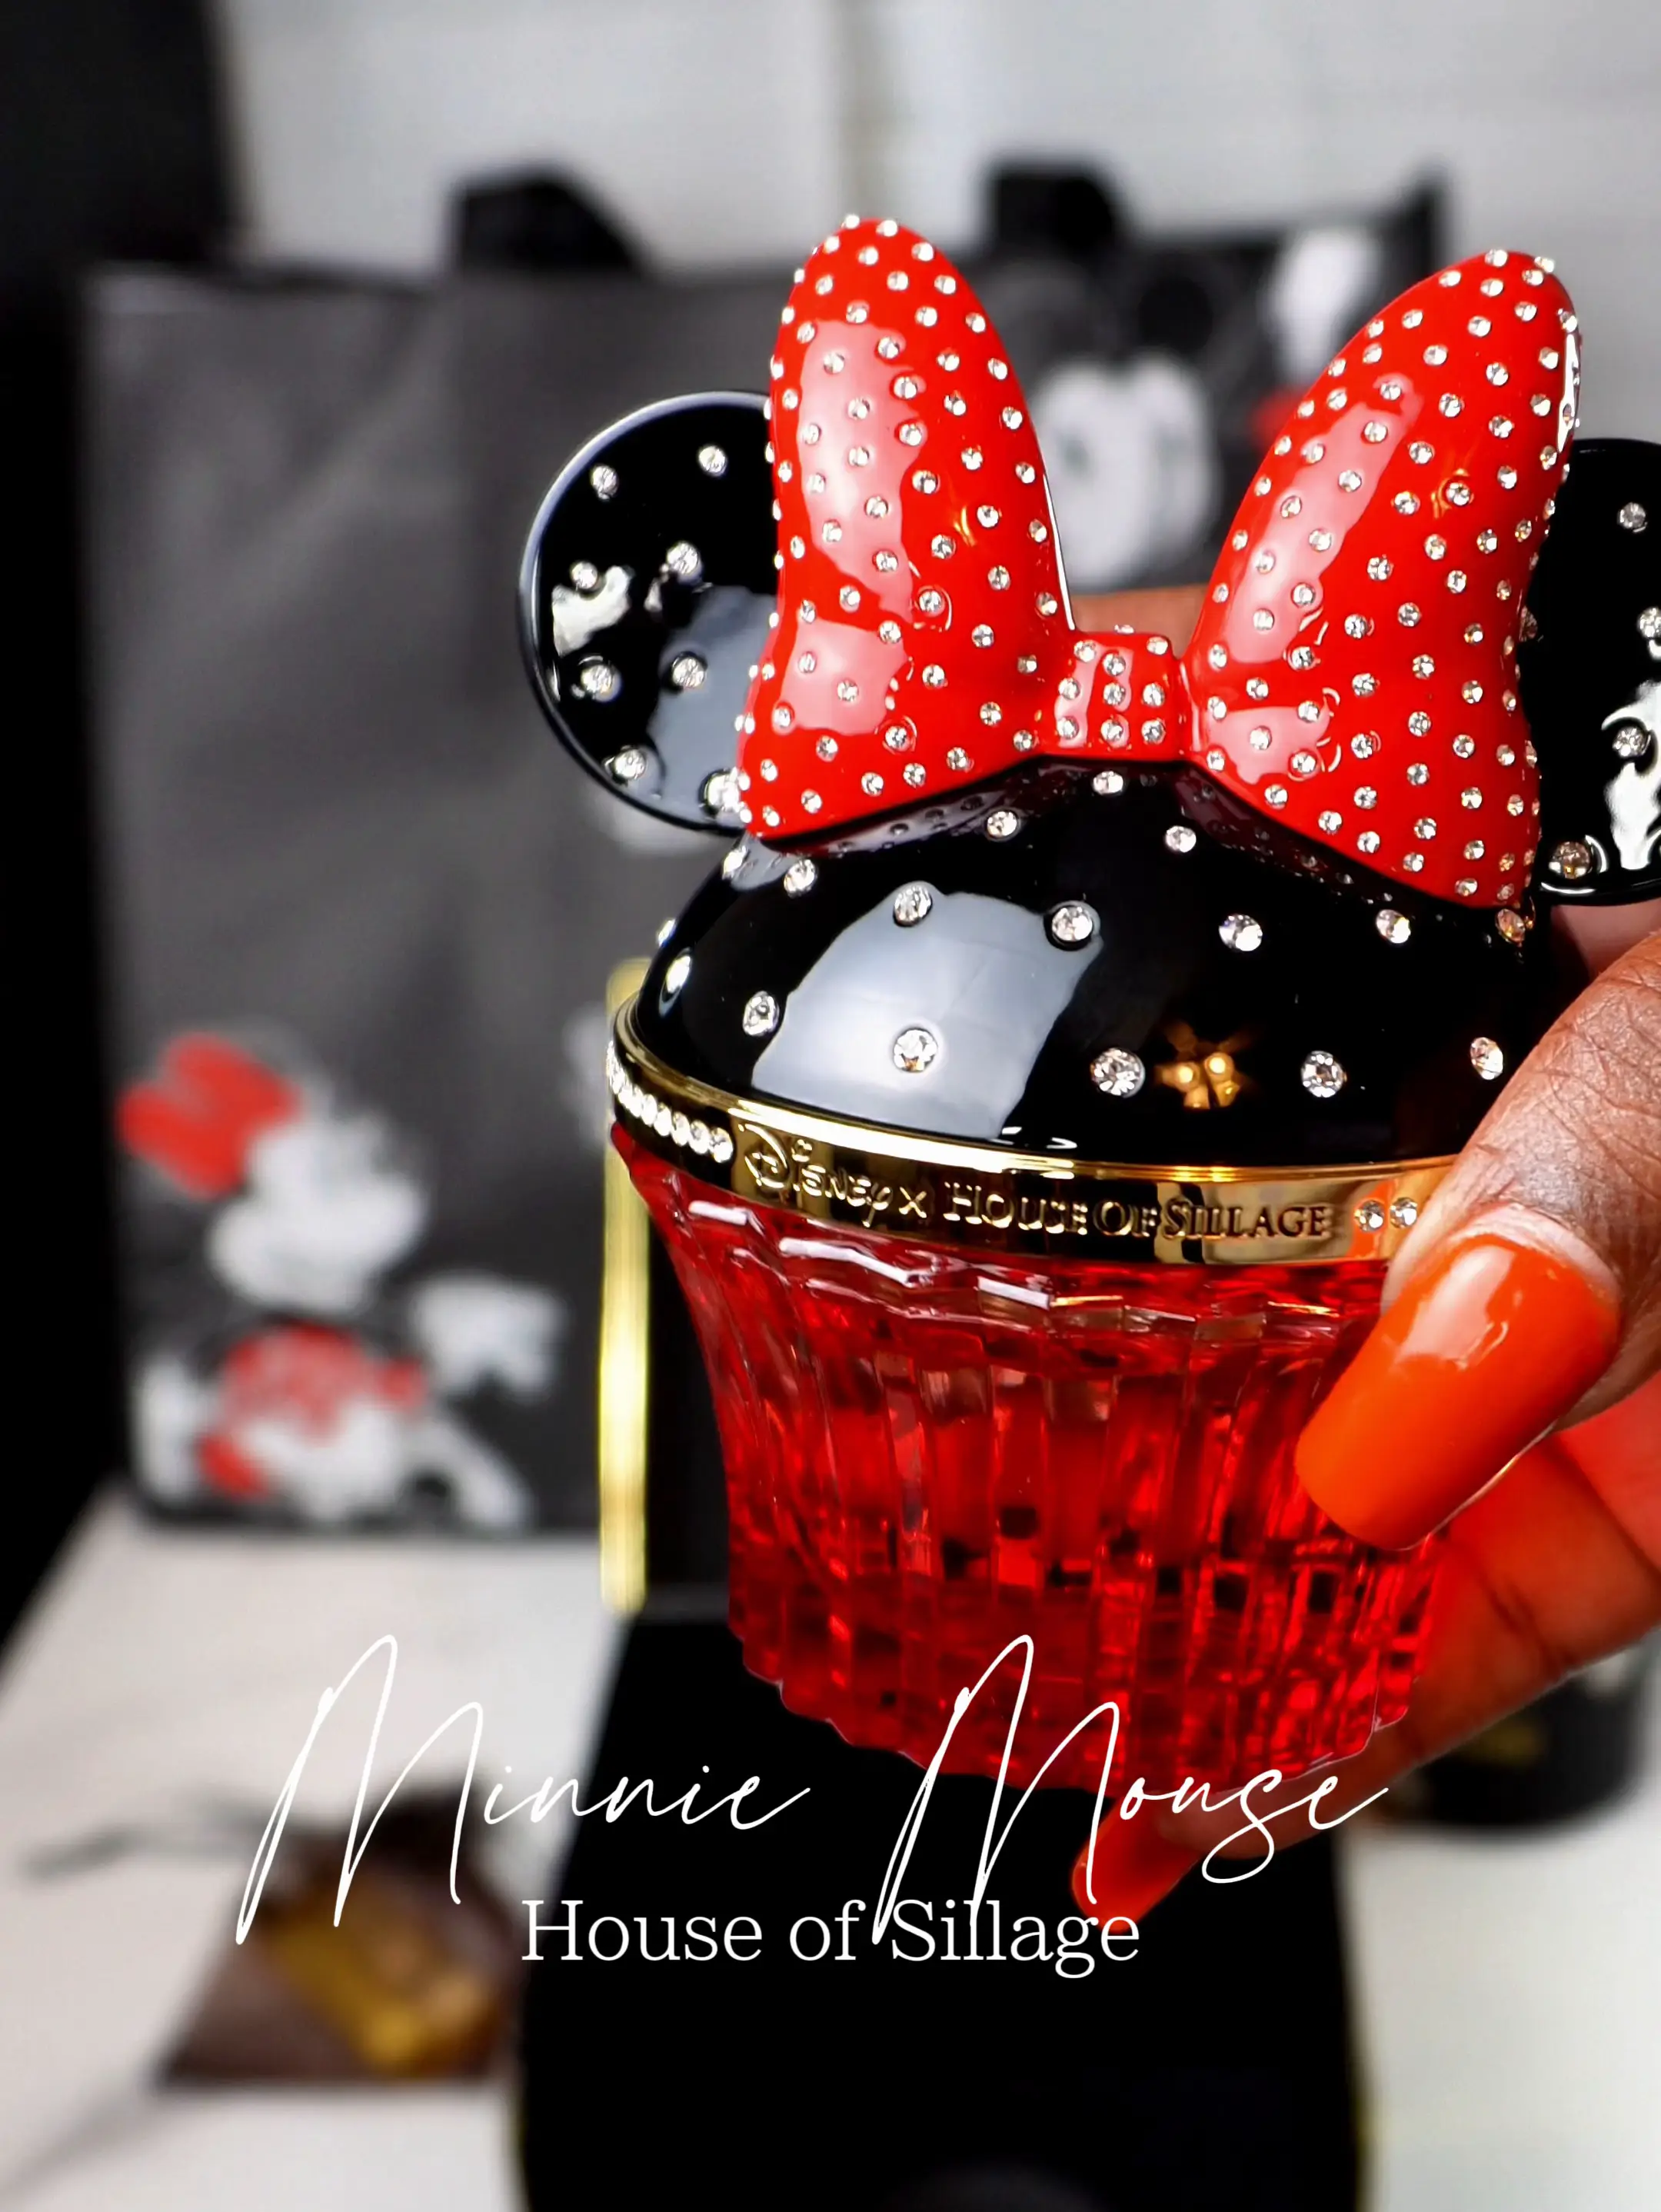 Minnie Mouse Perfume 😍, Video published by Joyyunspeakable